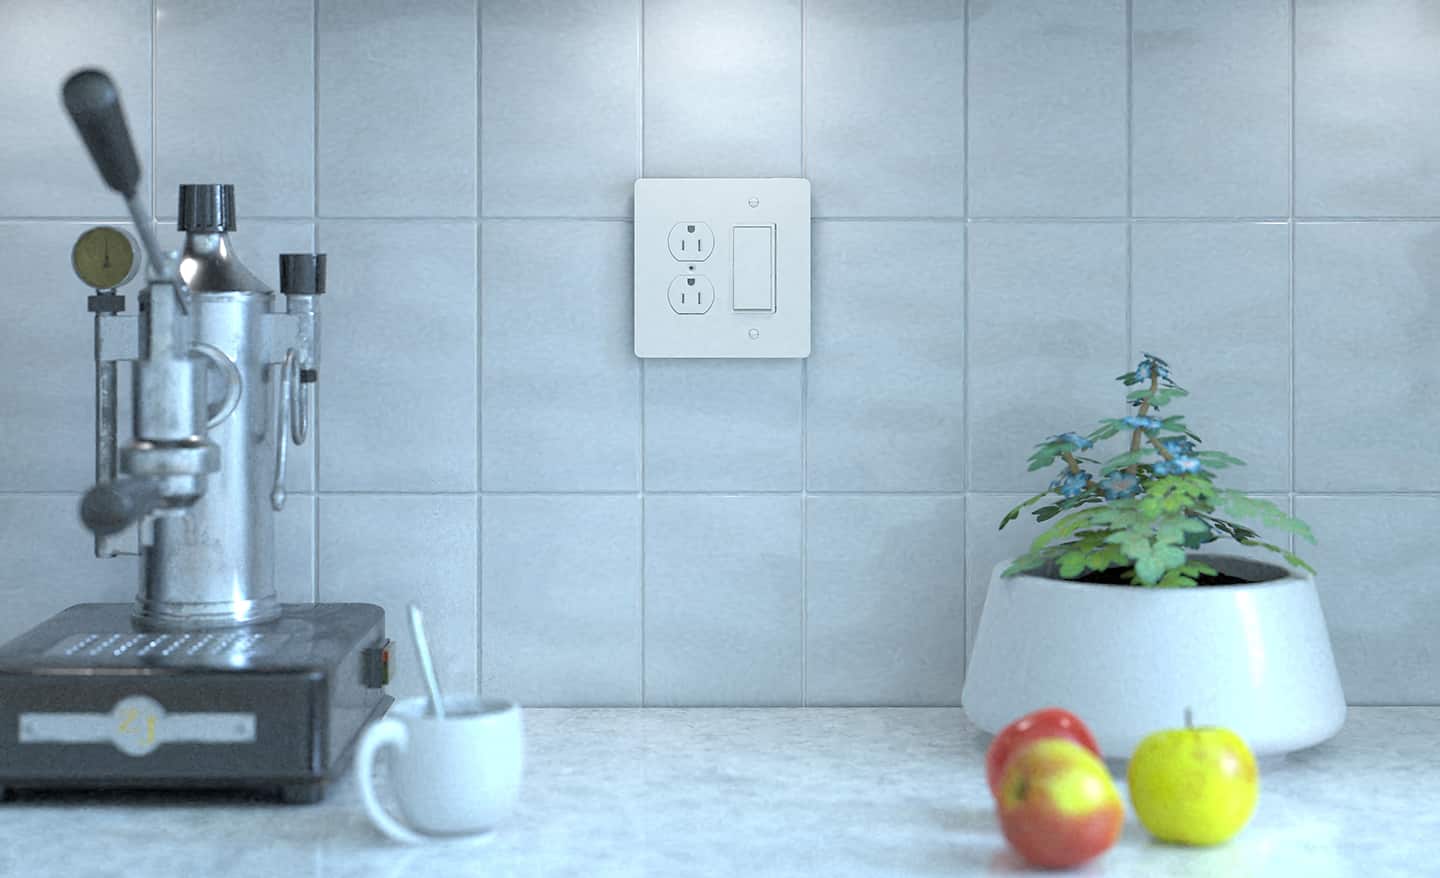 A GCFI wall outlet installed in a kitchen.